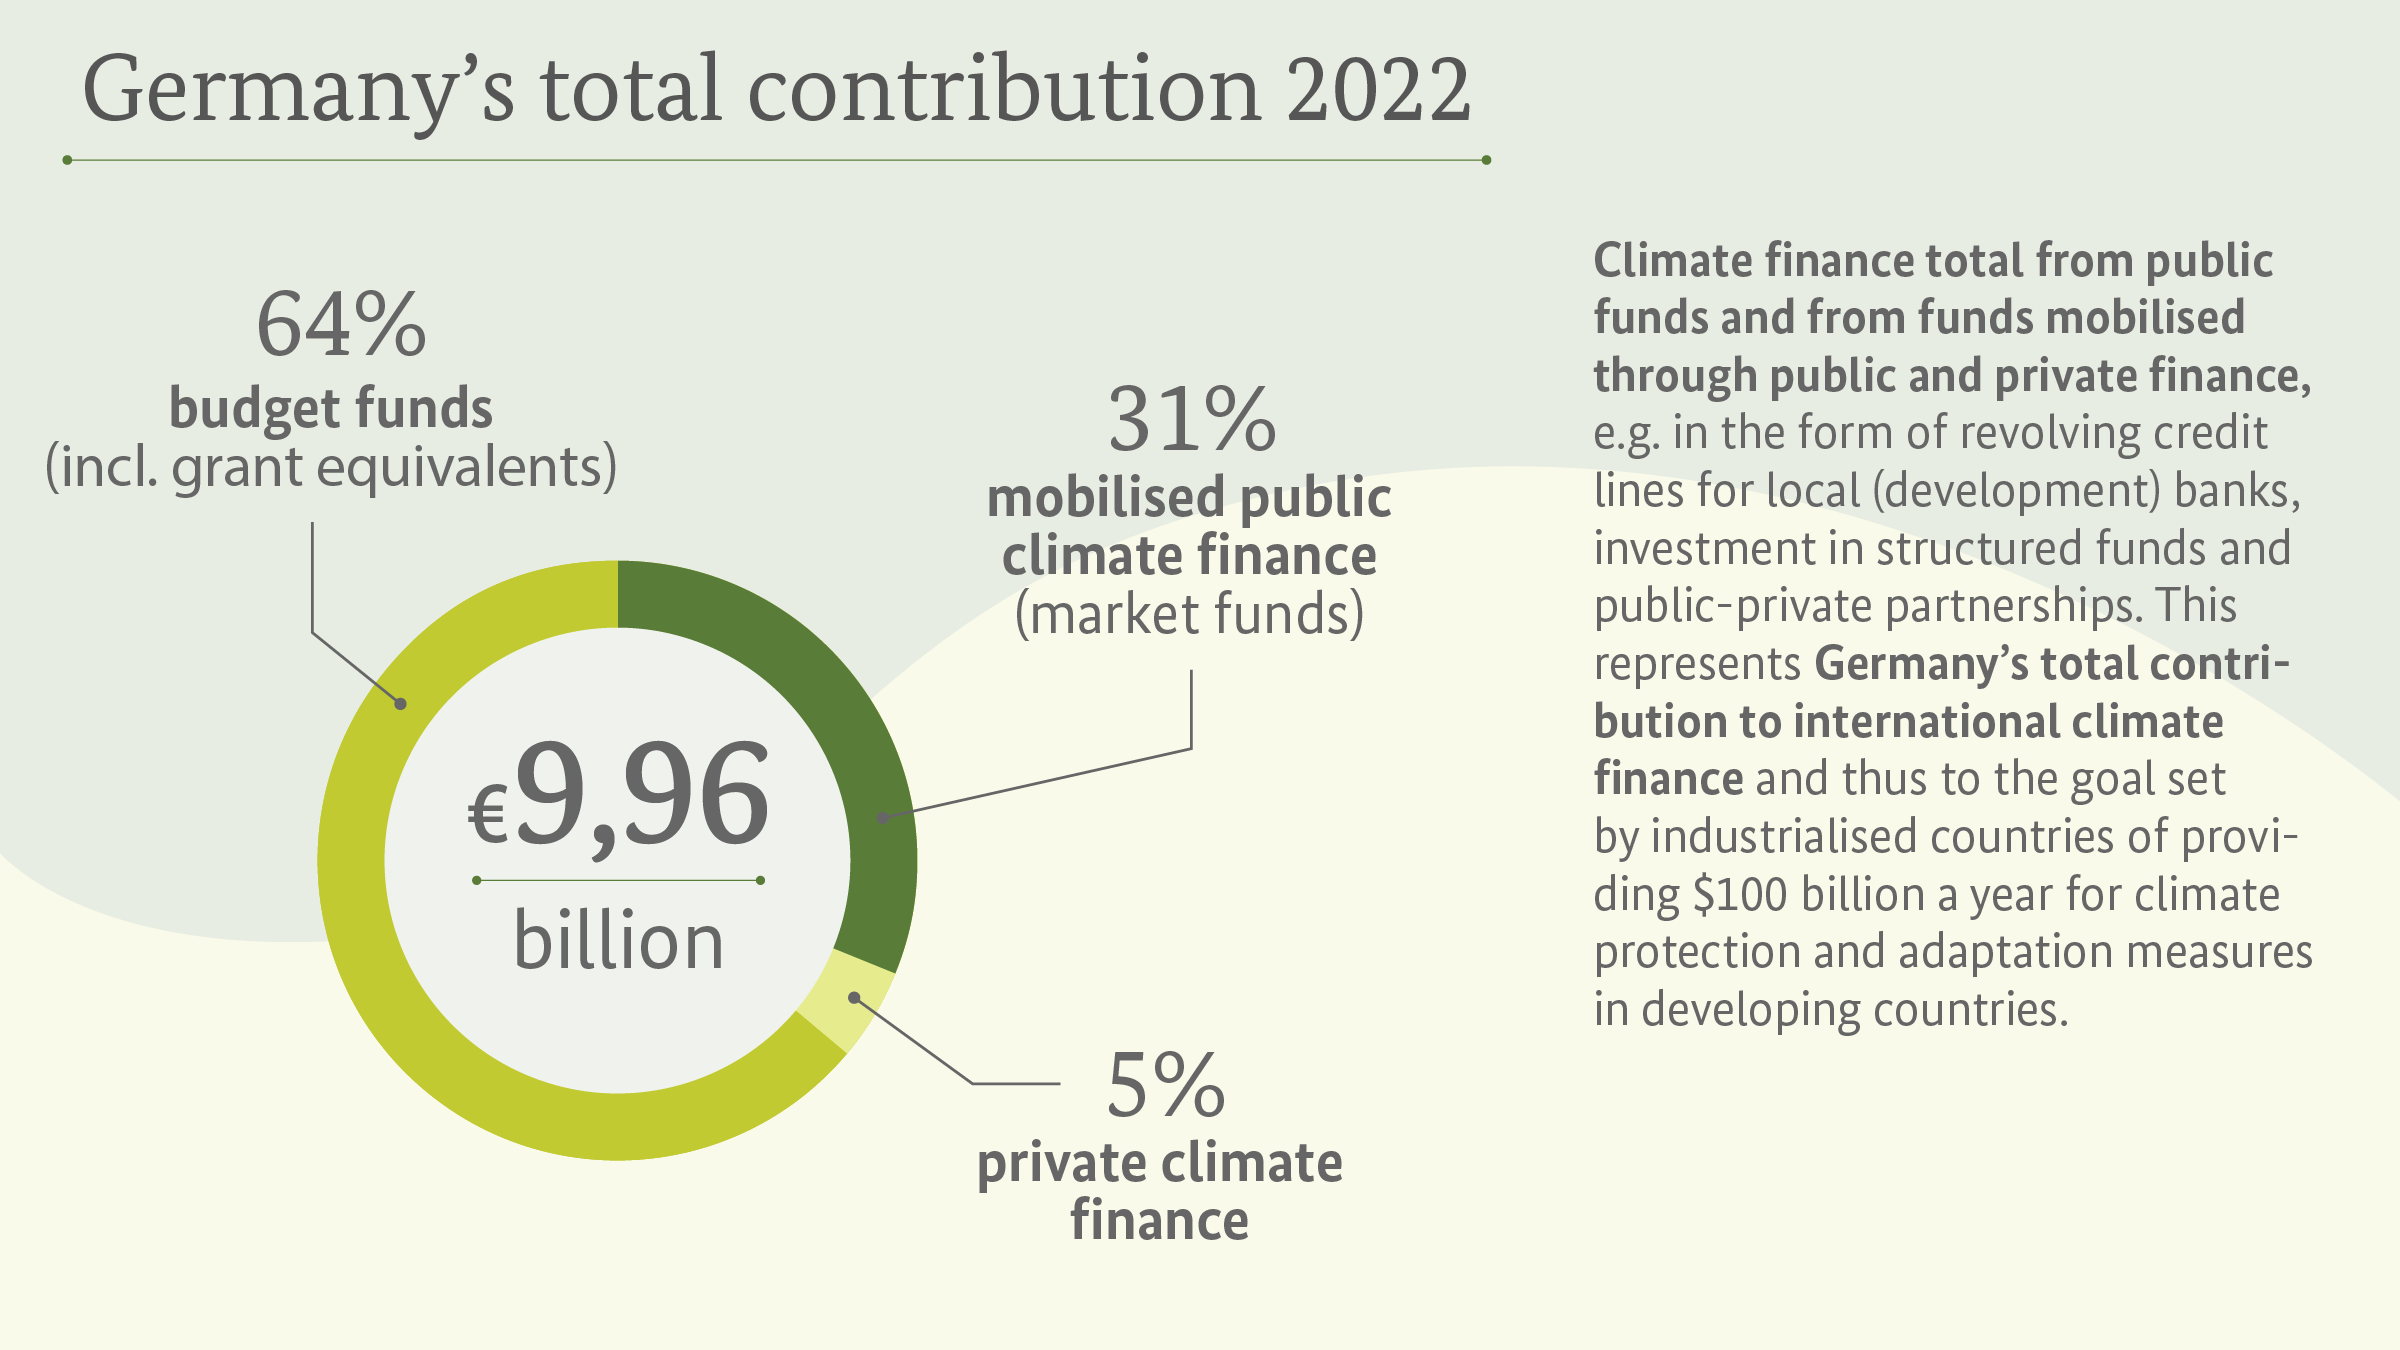 Germany's total contribution in 2022: Total climate financing from public funds and from publicly and privately mobilised funds, for example in the form of revolving credit lines to local (development) banks, investments in structured funds and public-private partnerships